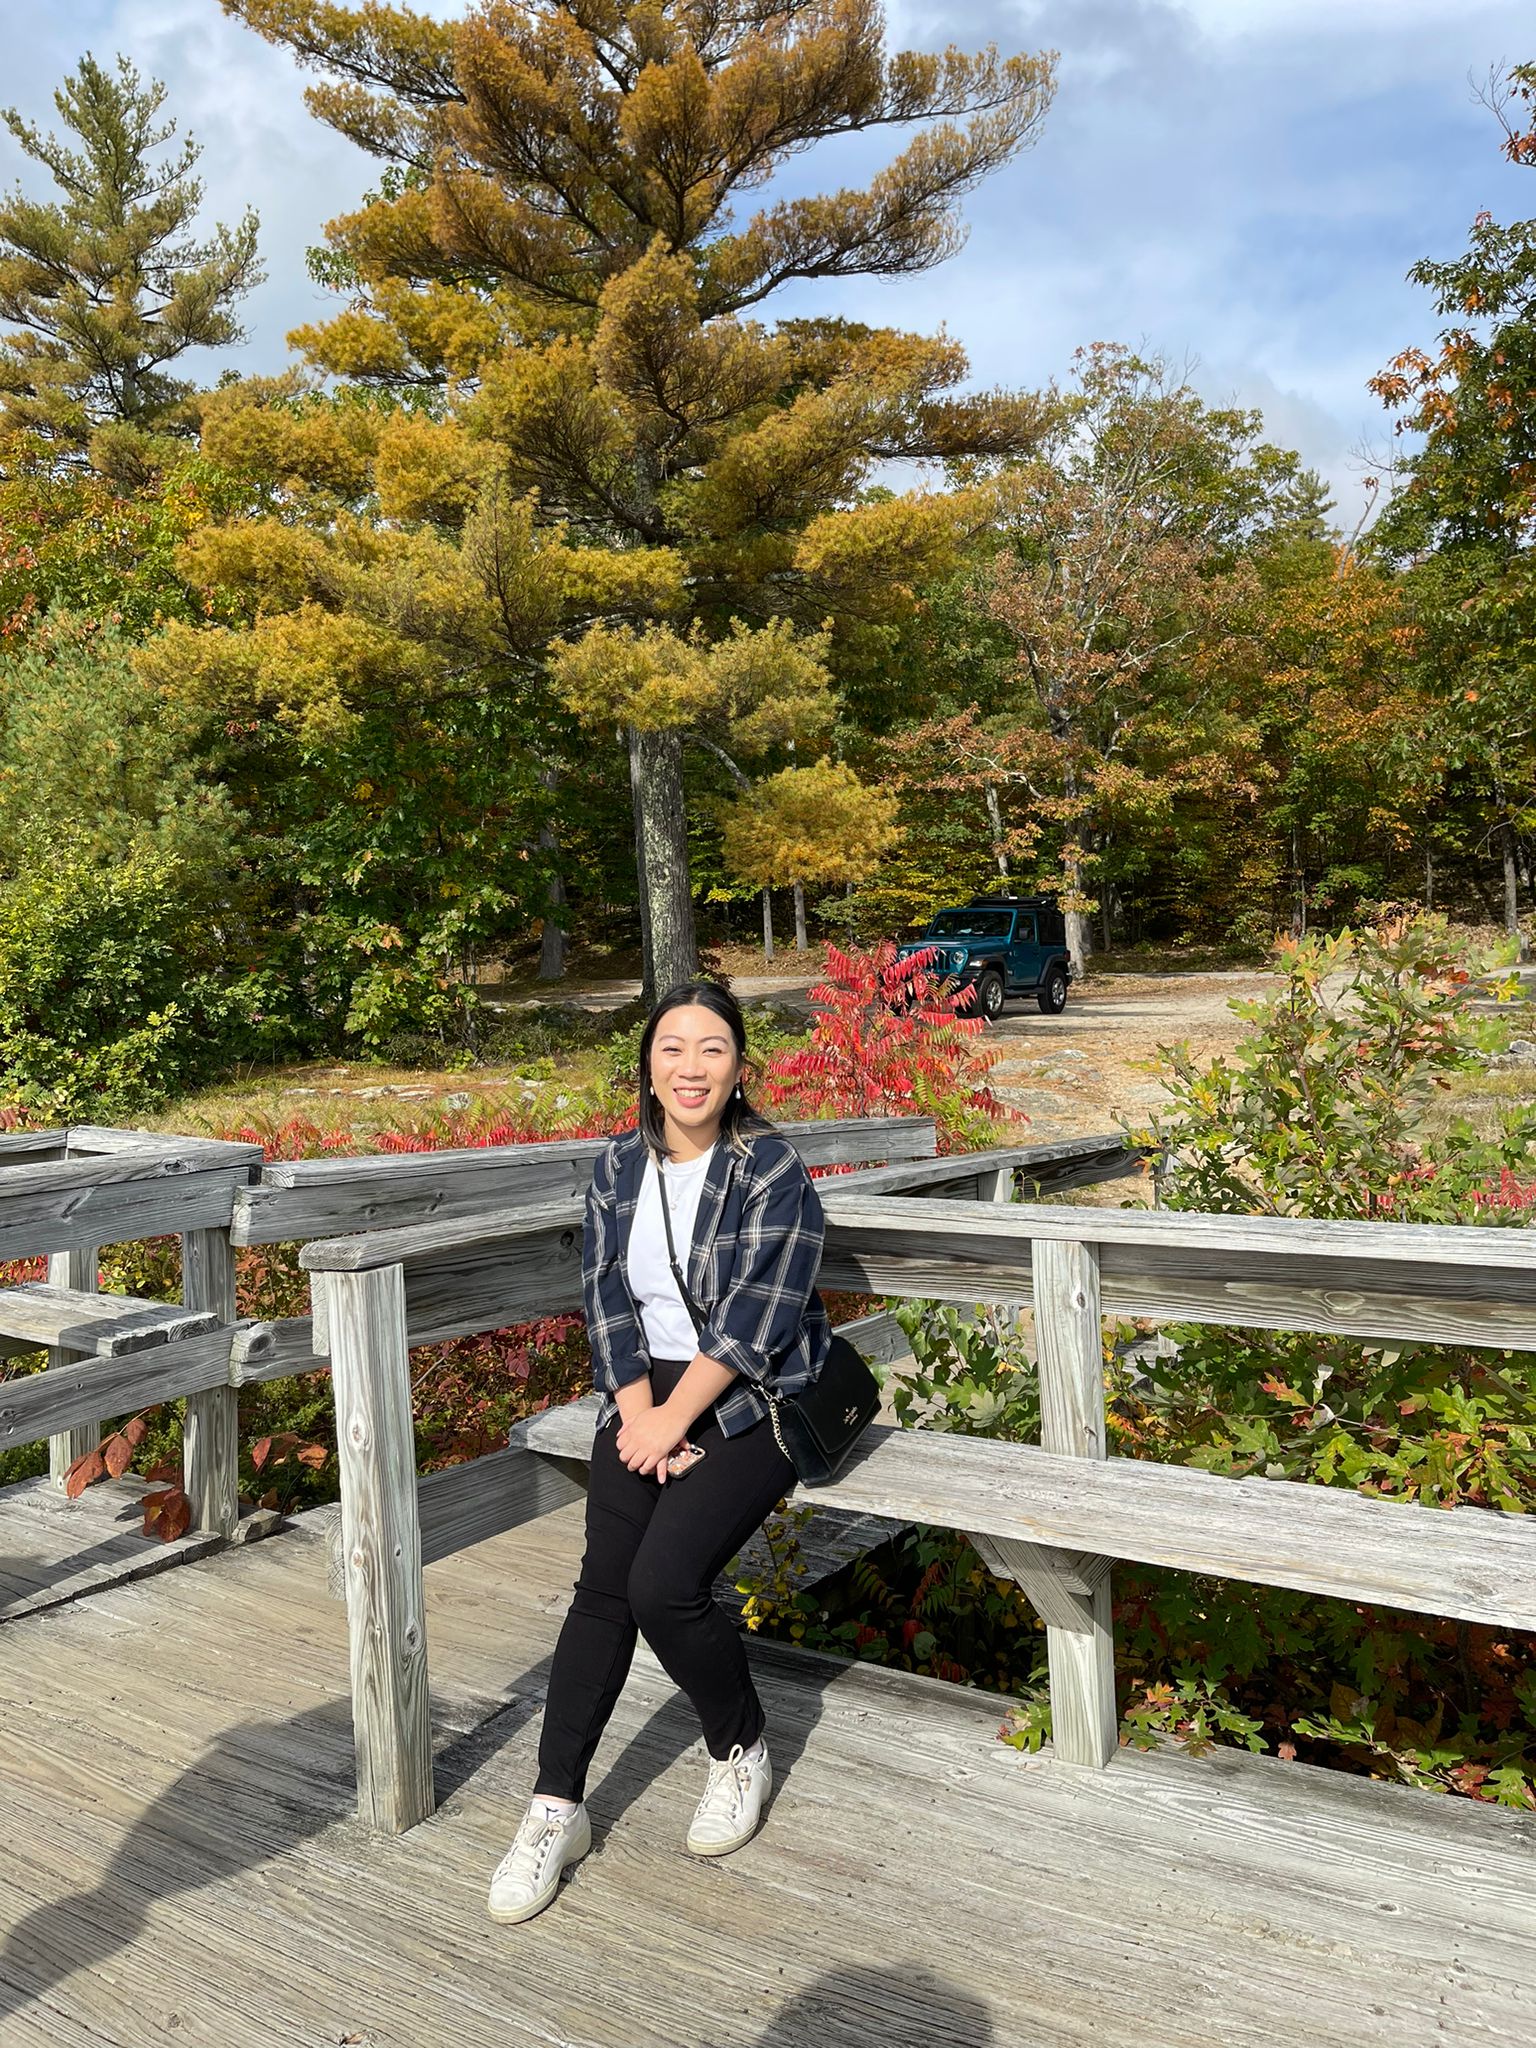  Pamela Dang's favorite job was serving in the AmeriCorps as a middle school mentor and teacher's assistant. 